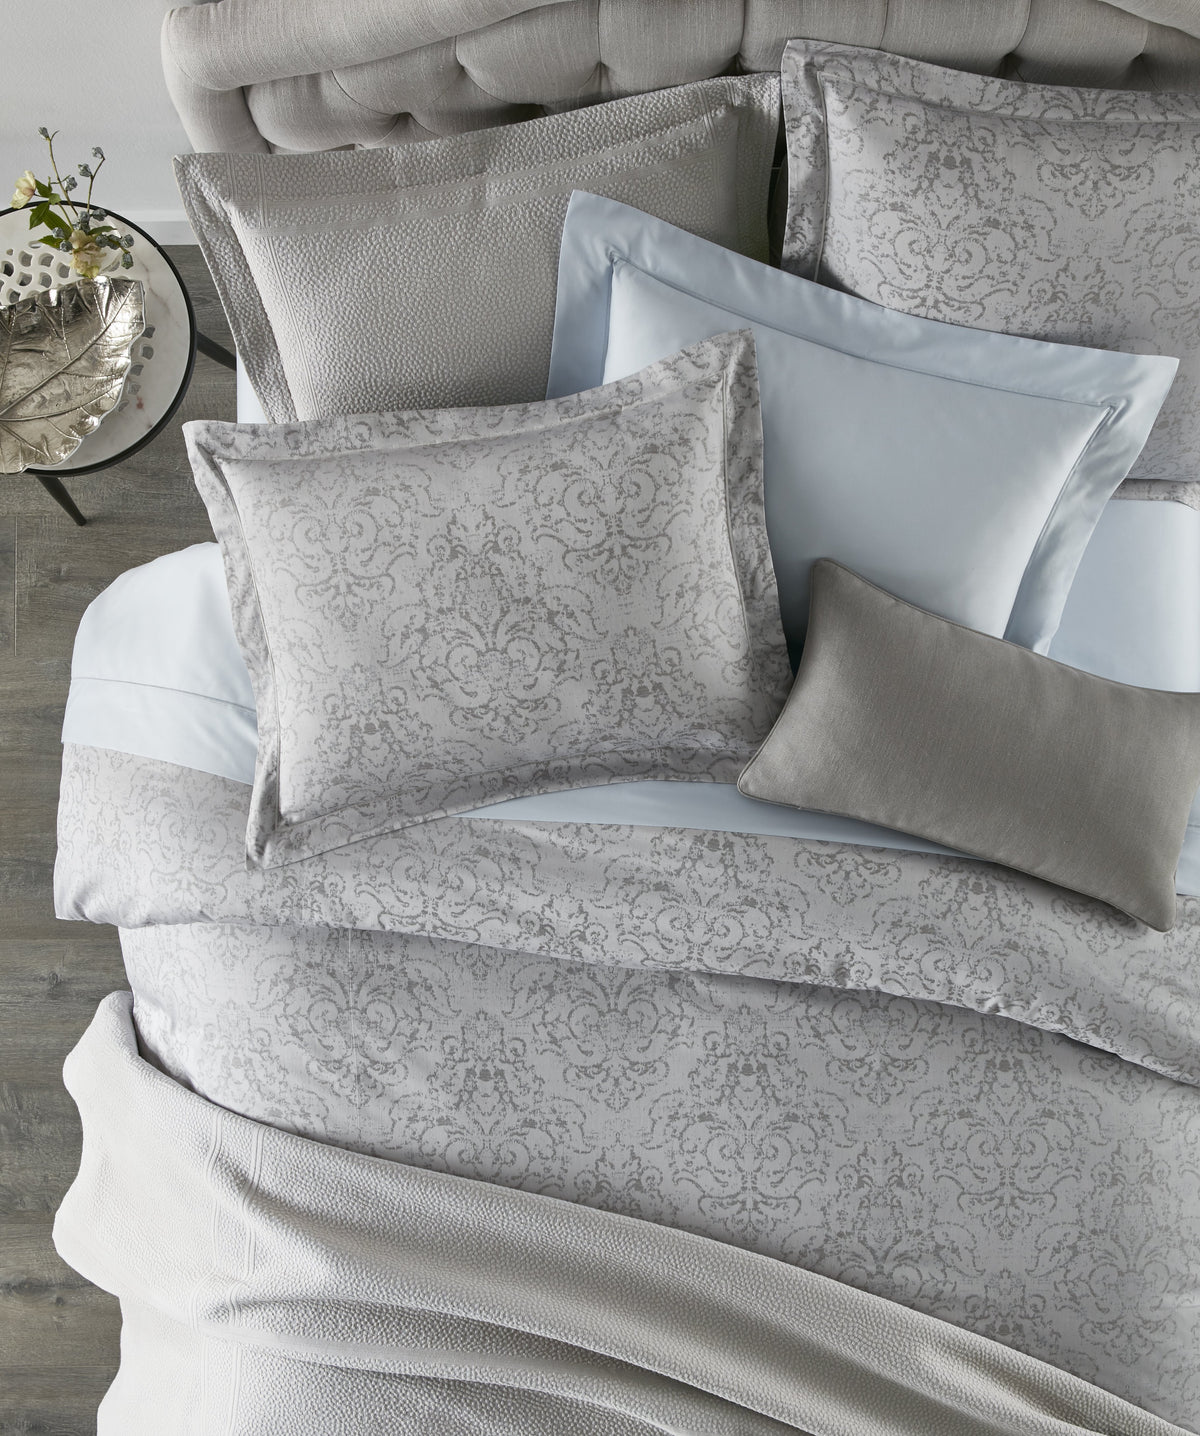 Bella Bedding by Peacock Alley | Fig Linens and Home - FIG LINENS AND HOME